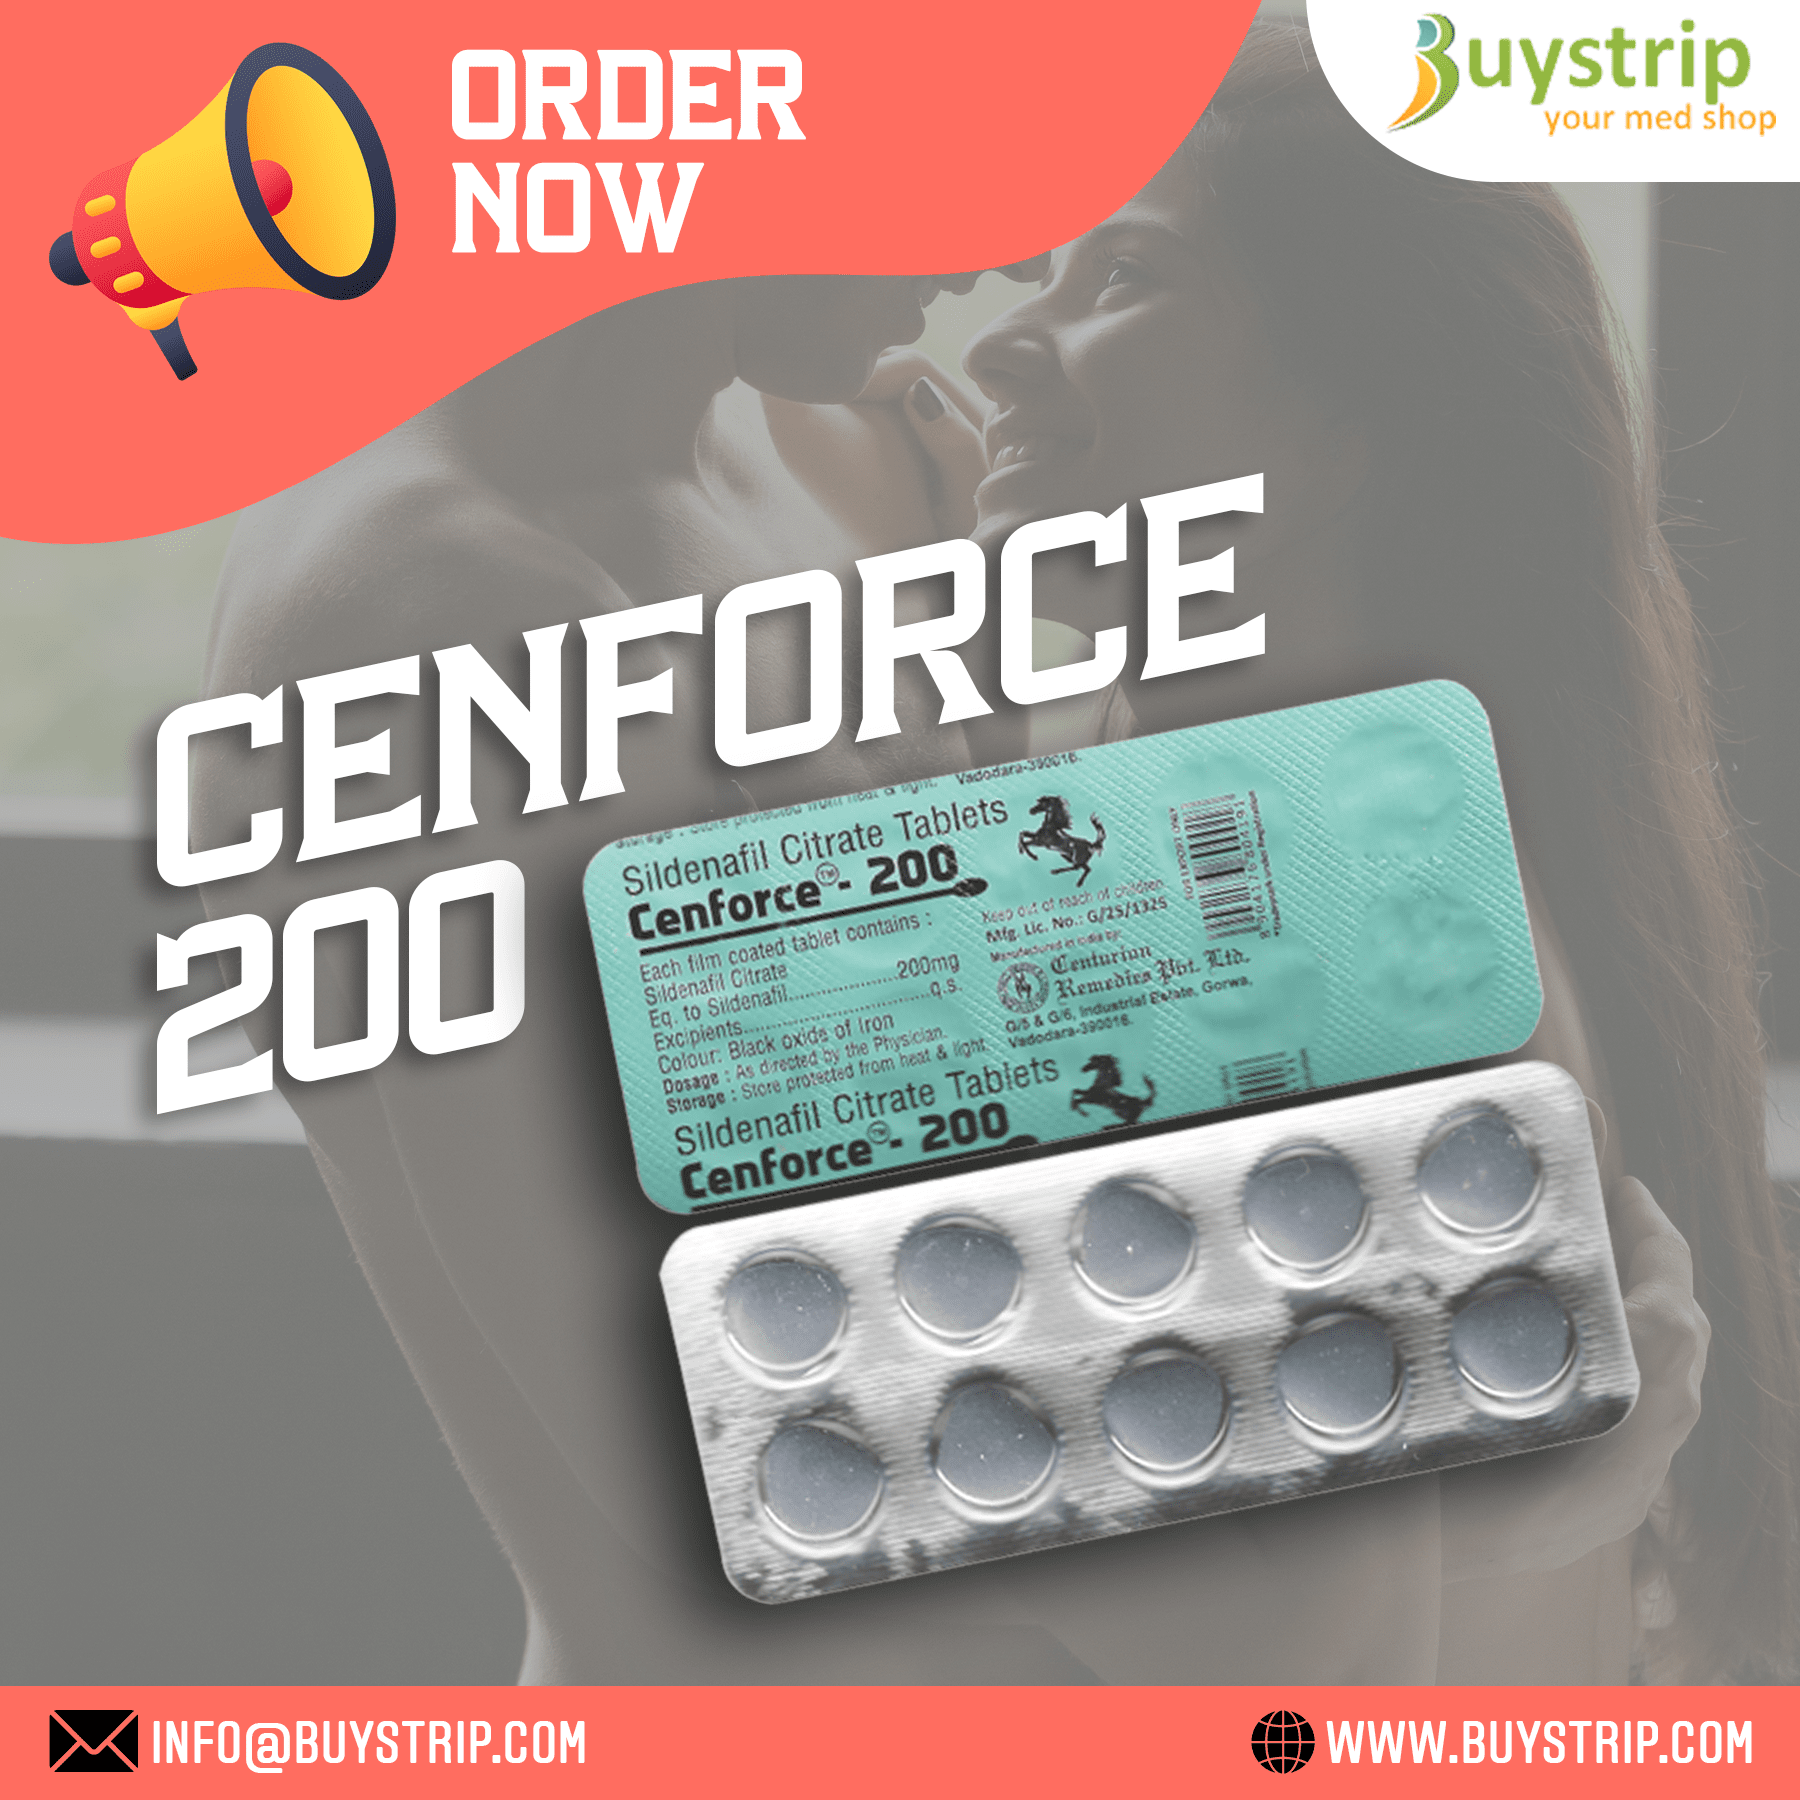 Rediscover intimacy and confidence with Cenforce 200 mg, a potent medication for treating erectile dysfunction and enjoying fulfilling relationships.